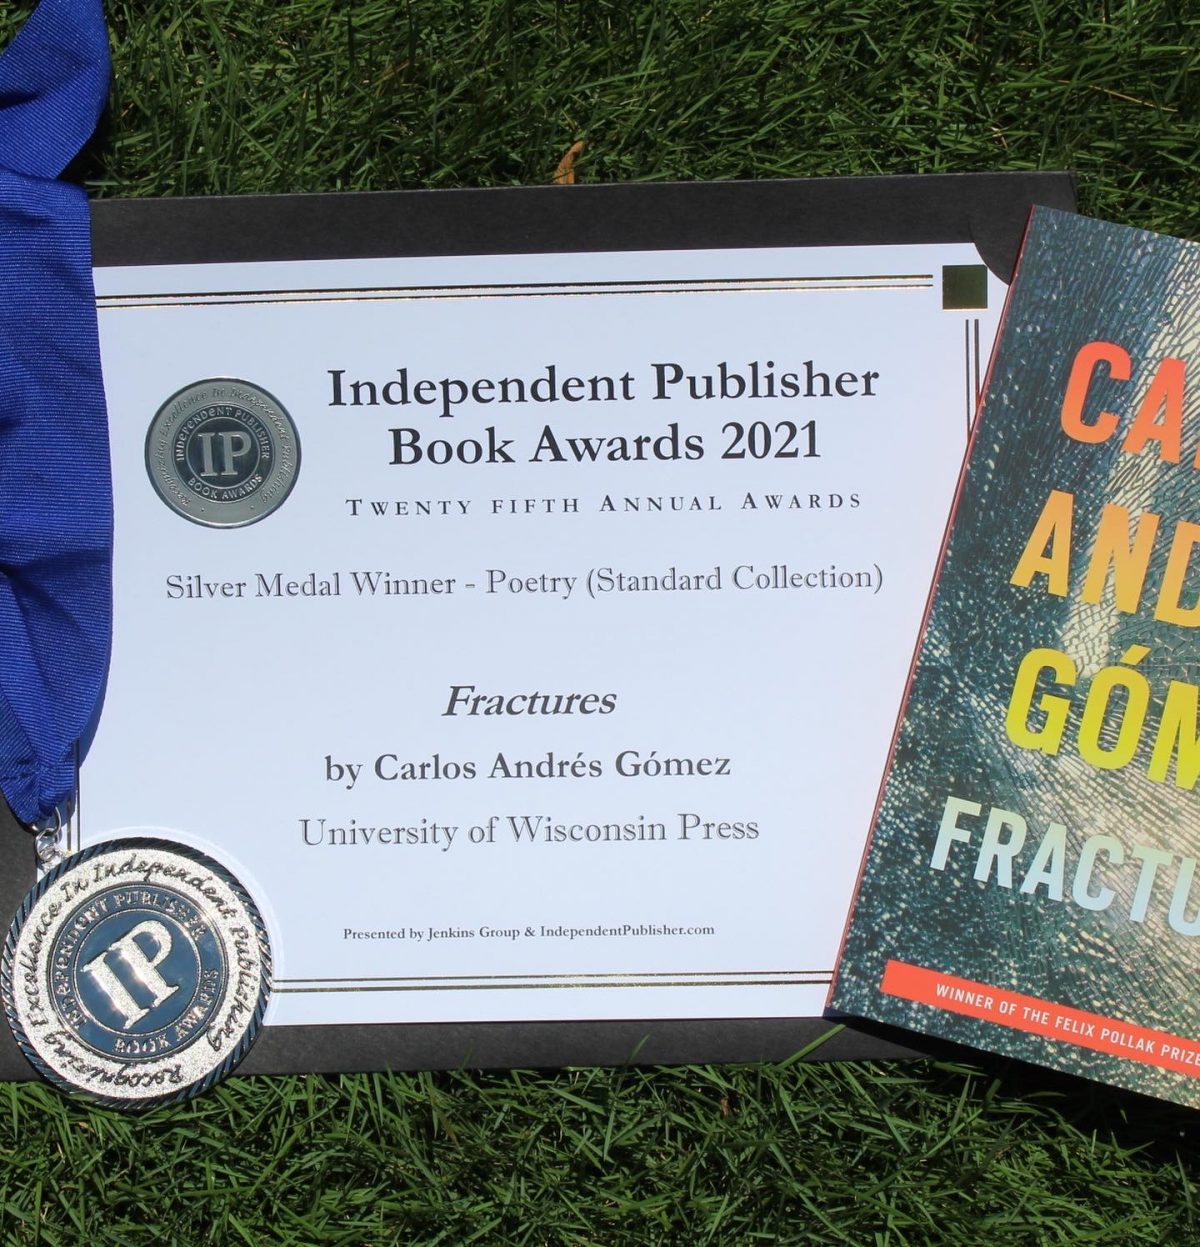 “Fractures” just won the Independent Publisher Book Award Silver Medal in Poetry!